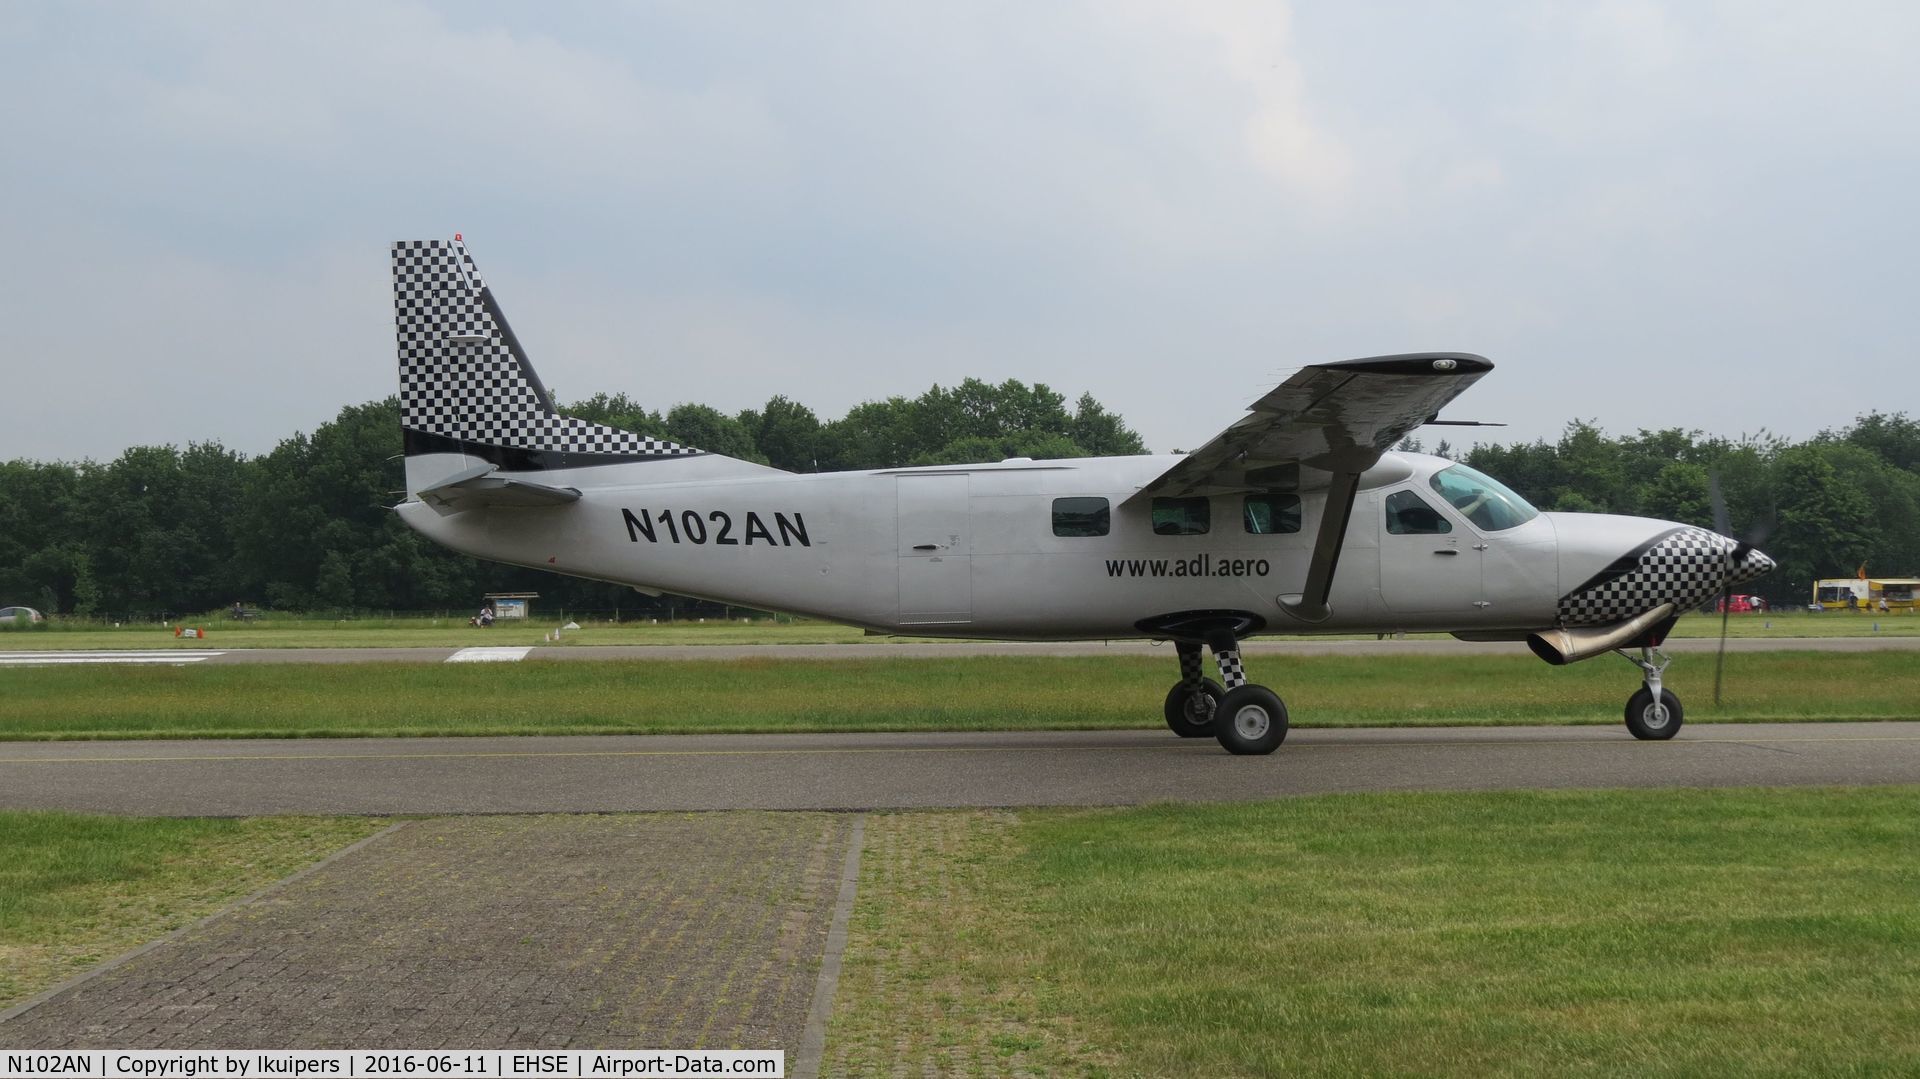 N102AN, 2001 Cessna 208B Super Cargomaster C/N 208B0906, This Cessna Caravan is to be used for the Eerste Nederlandse Parachute Club at Seppe